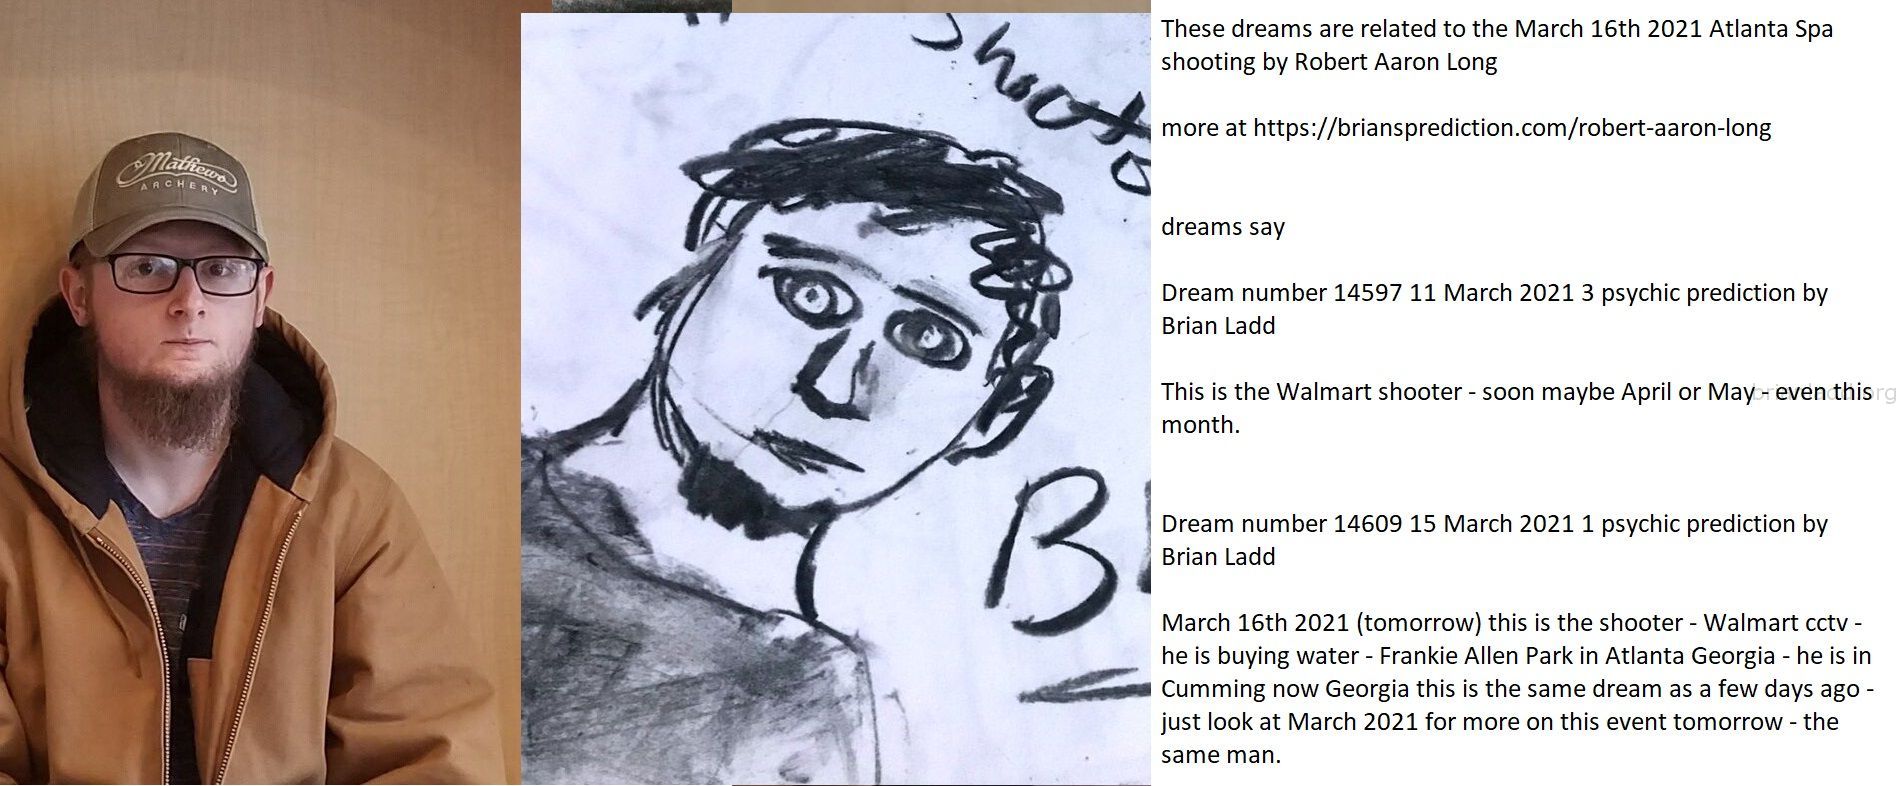 These Dreams Are Related To The March 16Th 2021 Atlanta Spa Shooting By Robert Aaron Long 1 - These Dreams Are Related T...
These Dreams Are Related To The March 16th 2021 Atlanta Spa Shooting By Robert Aaron Long  More At   https://briansprediction.com/Robert-Aaron-Long  Dreams Say  Dream Number 14597 11 March 2021 3 Psychic Prediction By Brian Ladd  This Is The Walmart Shooter - Soon Maybe April Or May - Even This Month.  Dream Number 14609 15 March 2021 1 Psychic Prediction By Brian Ladd  March 16th 2021 (tomorrow) This Is The Shooter - Walmart Cctv - He Is Buying Water - Frankie Allen Park In Atlanta Georgia - He Is In Cumming Now Georgia This Is The Same Dream As A Few Days Ago - Just Look At March 2021 For More On This Event Tomorrow - The Same Man.  4043525252  China Virus  News  8 People Killed, Including 4 Asian Women, In Shootings At 3 Georgia Spas  March 16th, 2021  Updated: March 16, 2021 - 9:24 Pm  Woodstock, Ga. Â€” The Man Accused Of Killing Four People And Injuring Another Person At A Cherokee County Massage Business Tuesday Afternoon Has Been Caught.  The Cherokee County Sheriffâ€™S Office Said The Suspect, Robert Aaron Long, 21, Was Captured Around 8:30 P.M. Following A Chase In Crisp County In South Georgia, About Three Hours Away From The Shooting Scene.  Eight People Were Killed Tuesday At Three Different Spas In Northwest Georgia, Police Said. At Least Four Of The Victims Were Asian Women.  A Shooter Killed Three Asian Women At Gold Spa In Atlanta, And A Fourth Asian Woman Was Killed Across The Street At Aromatherapy Spa, A Local Cbs Affiliate.  About An Hour Earlier And 25 Miles North In Acworth, Four More People Were Killed At Youngâ€™S Asian Massage Parlor, According To The Atlanta Journal-Constitution. One Other Person Was Injured, And The Victims From The Acworth Shooting Have Not Been Identified In Any Way.  It Is Currently Unknown If The Shootings Are Connected.  Hear Firsthand Why Parents Are Trusting Their College Savings To Florida  Police Said Robert Aaron Long, A 21-Year-Old White Man, Was Arrested In Connection With Acworth Shooting, Local Abc Affiliate Wsb Reported. Cops Said Long Was Captured On Surveillance Video Leaving The Scene And Was Arrested After A Chase In Crisp County, About 125 Miles South Of Atlanta.  Cops Are Still Investigating A Potential Motive For All Three Shootings, And Have Therefore Not Concluded If The Shootings Were Racially Motivated.
